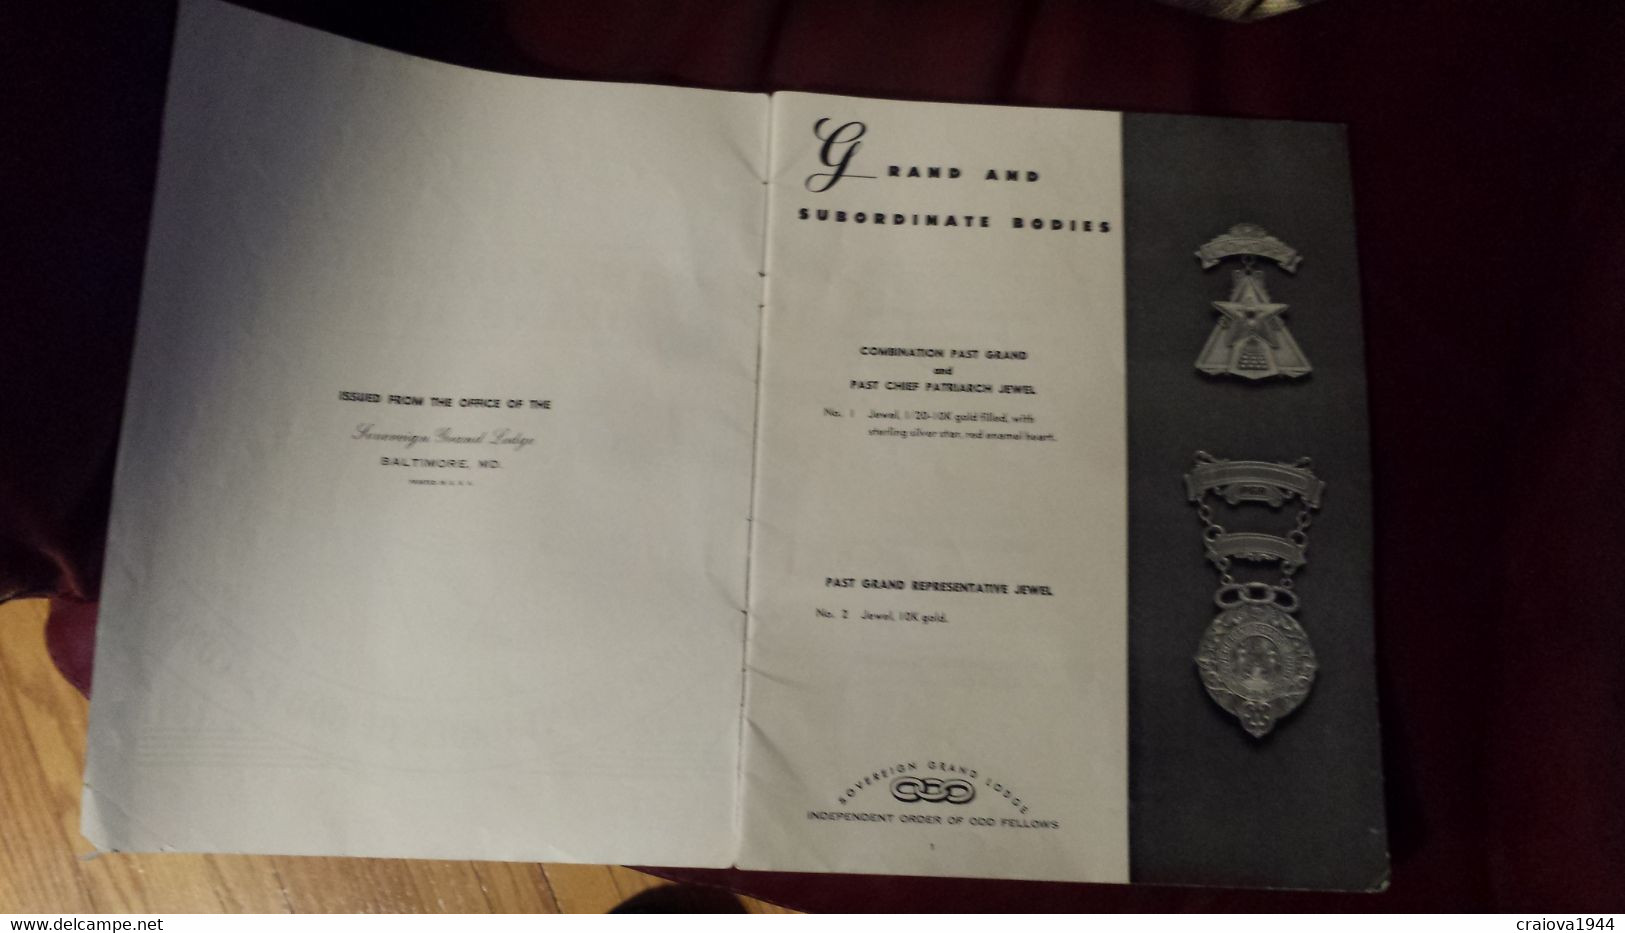 "THE SOVERIGN GRAND LODGE" INDEPENDENT ORDER OF ODD FELLOWS -VINTAGE CATALOGUE OF MASONIC JEWELS - 1950-Now